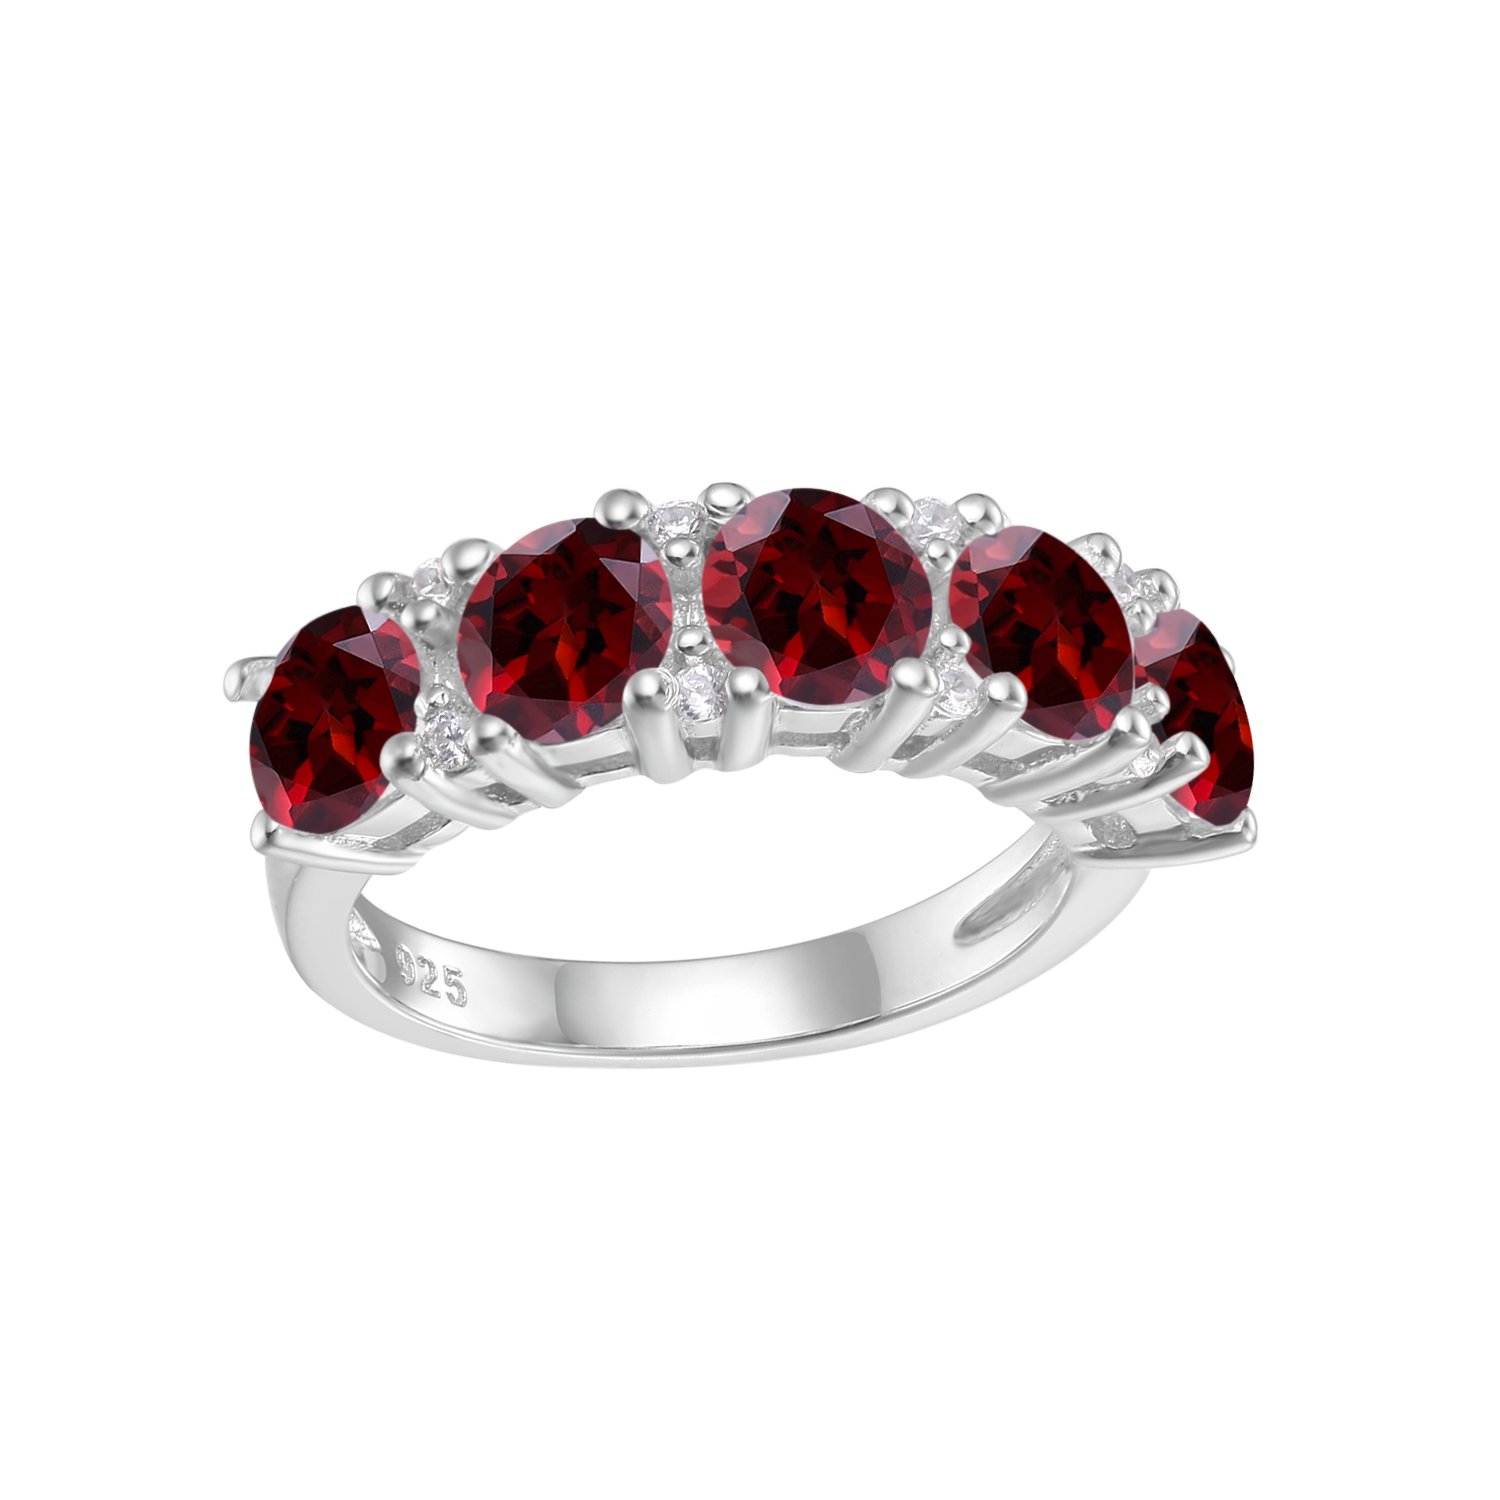 A silver ring set with five dark red gems.